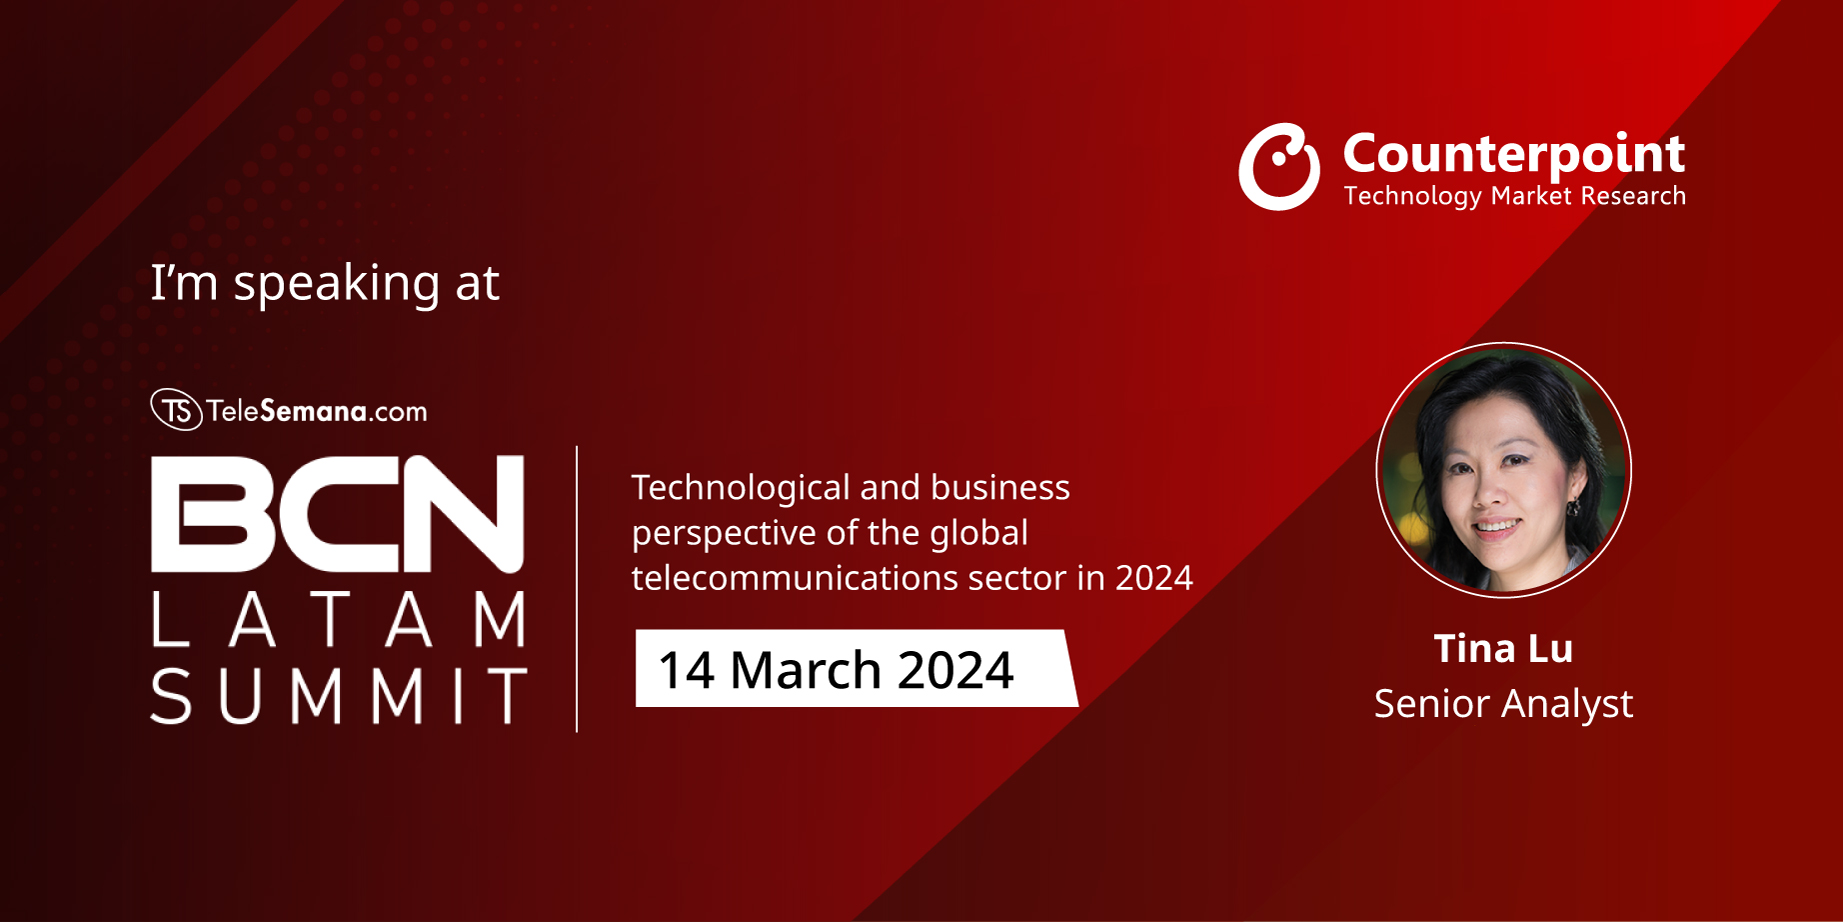 Announcement poster for Counterpoint Research attending the BCN2024 LATAM SUMMIT